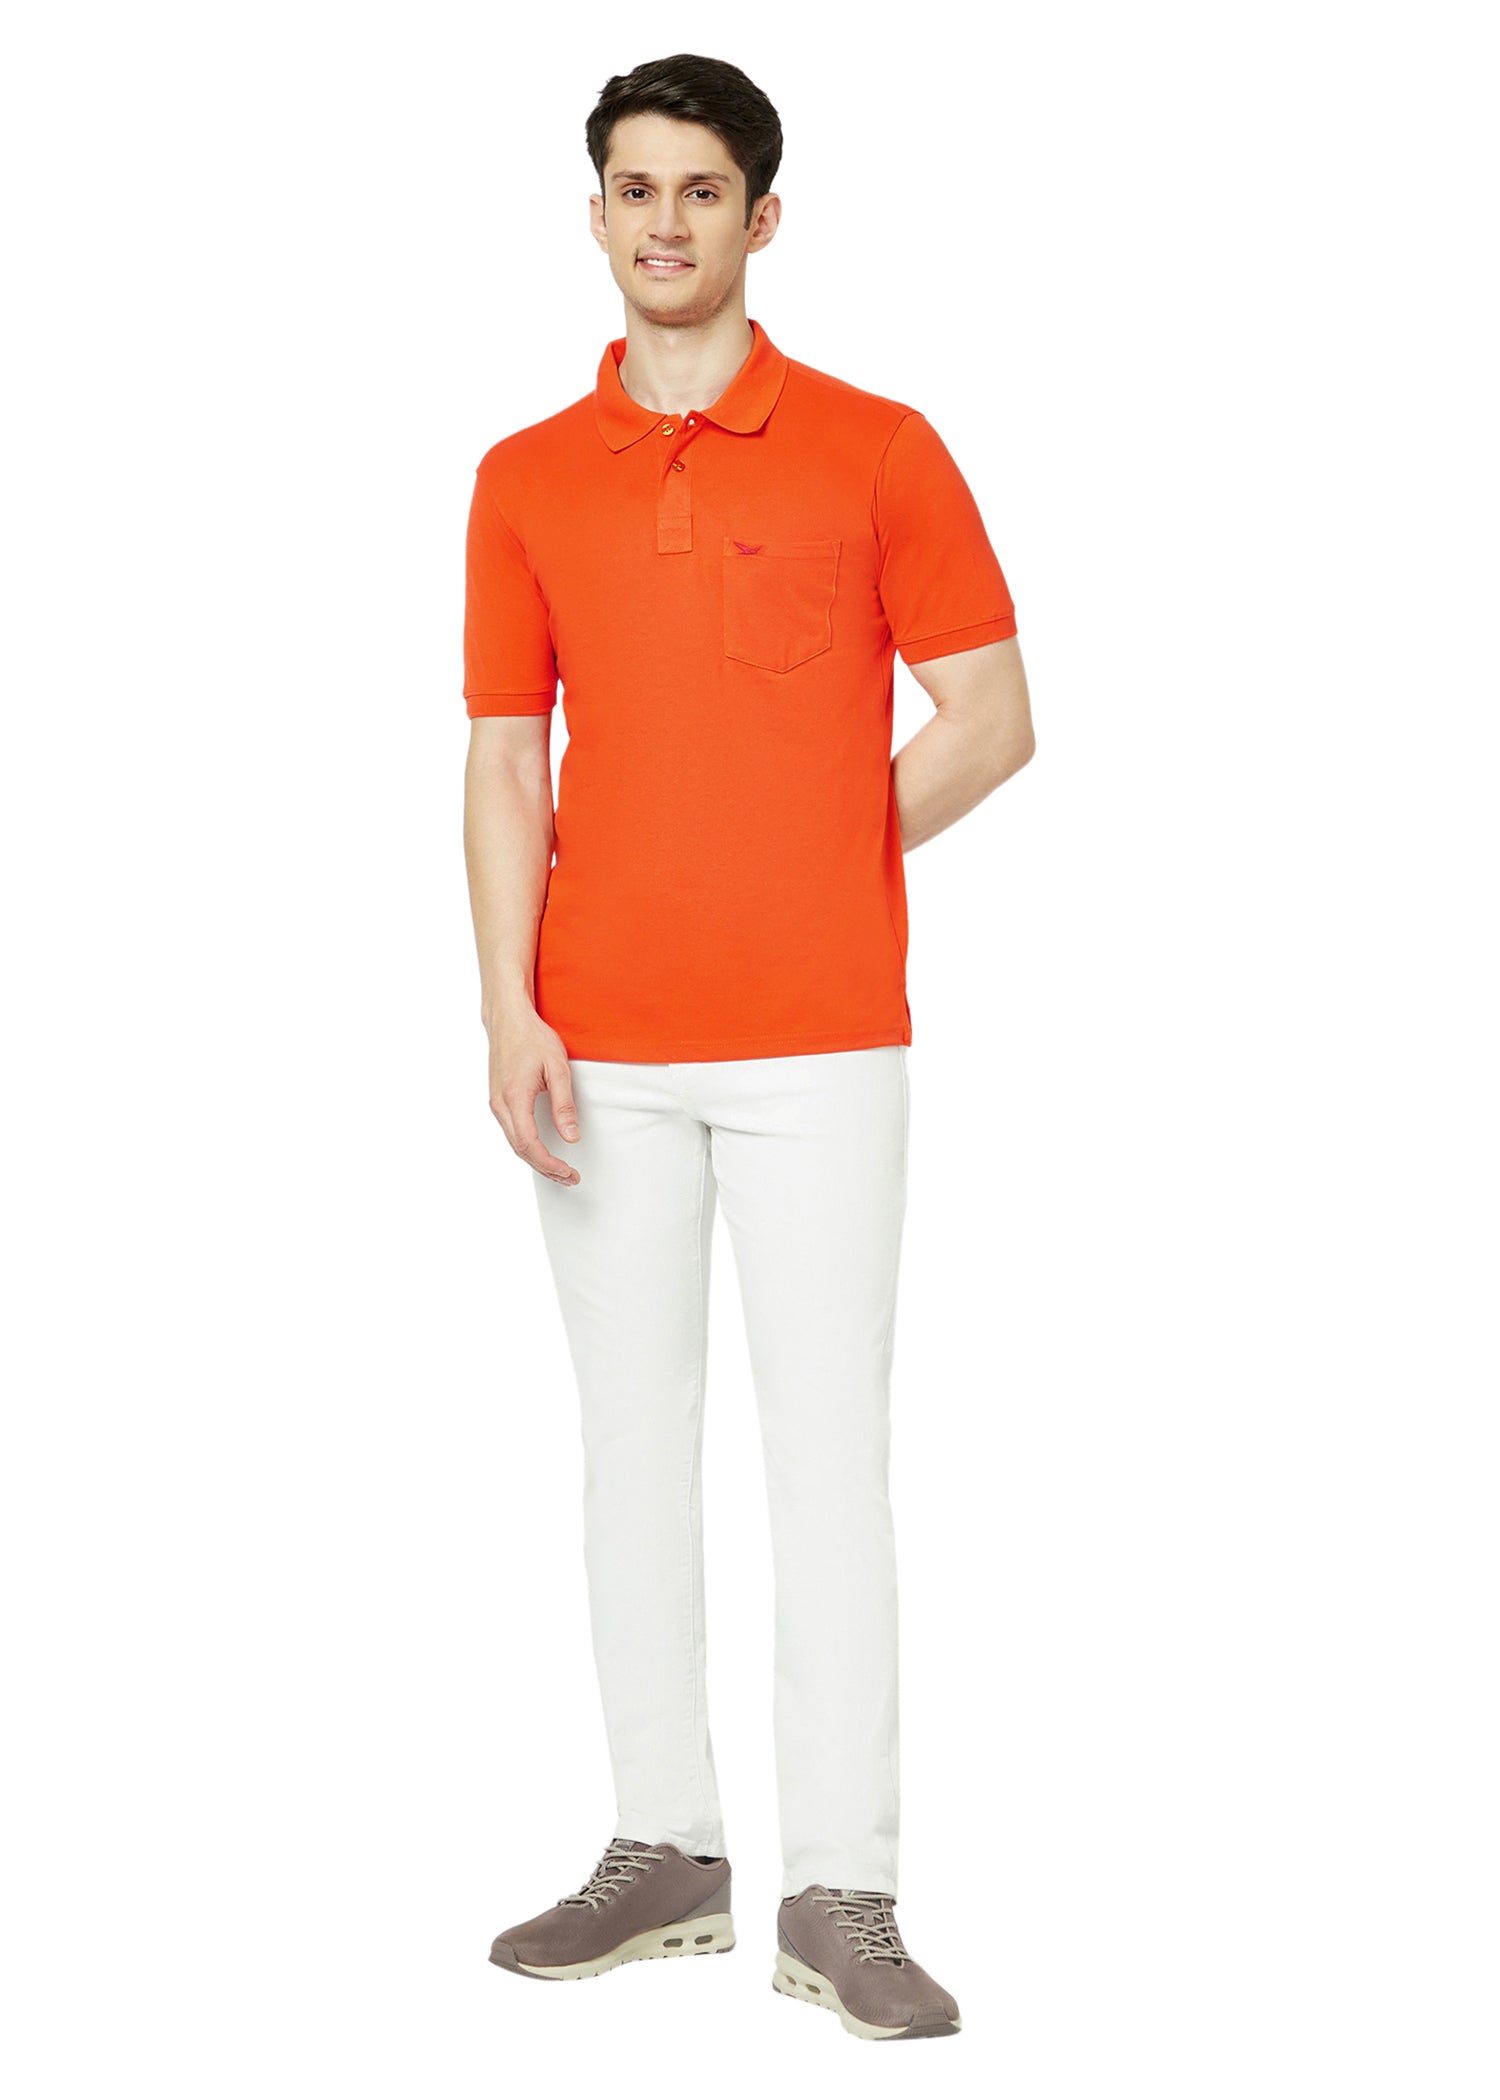 Hiflyers Men'S Solid Regular Fit Polo T-Shirt With Pocket -Orange